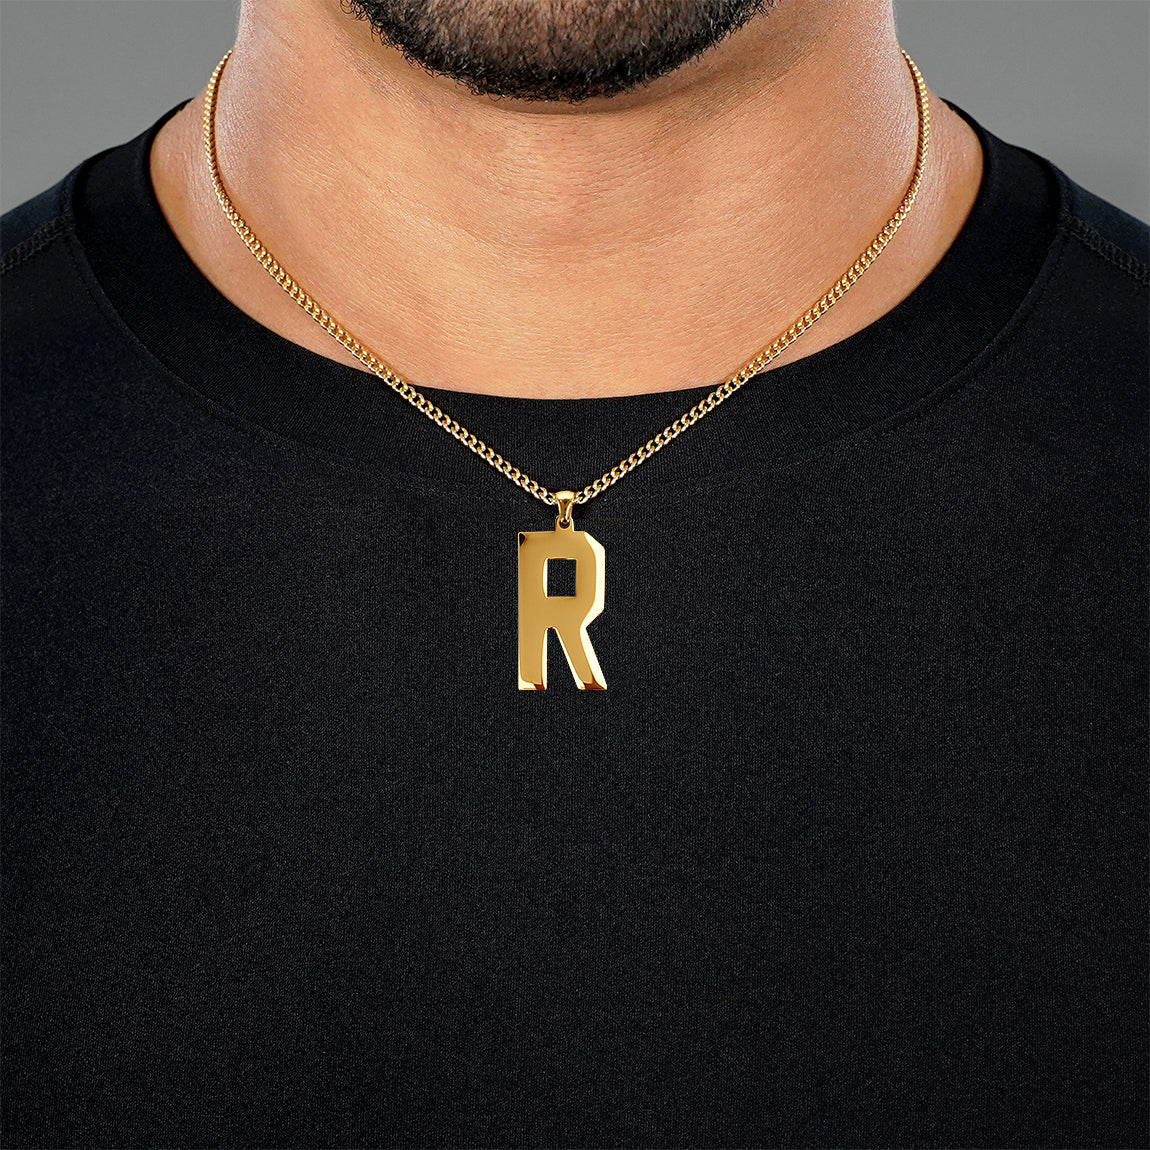 R Letter Pendant with Chain Necklace - Gold Plated Stainless Steel